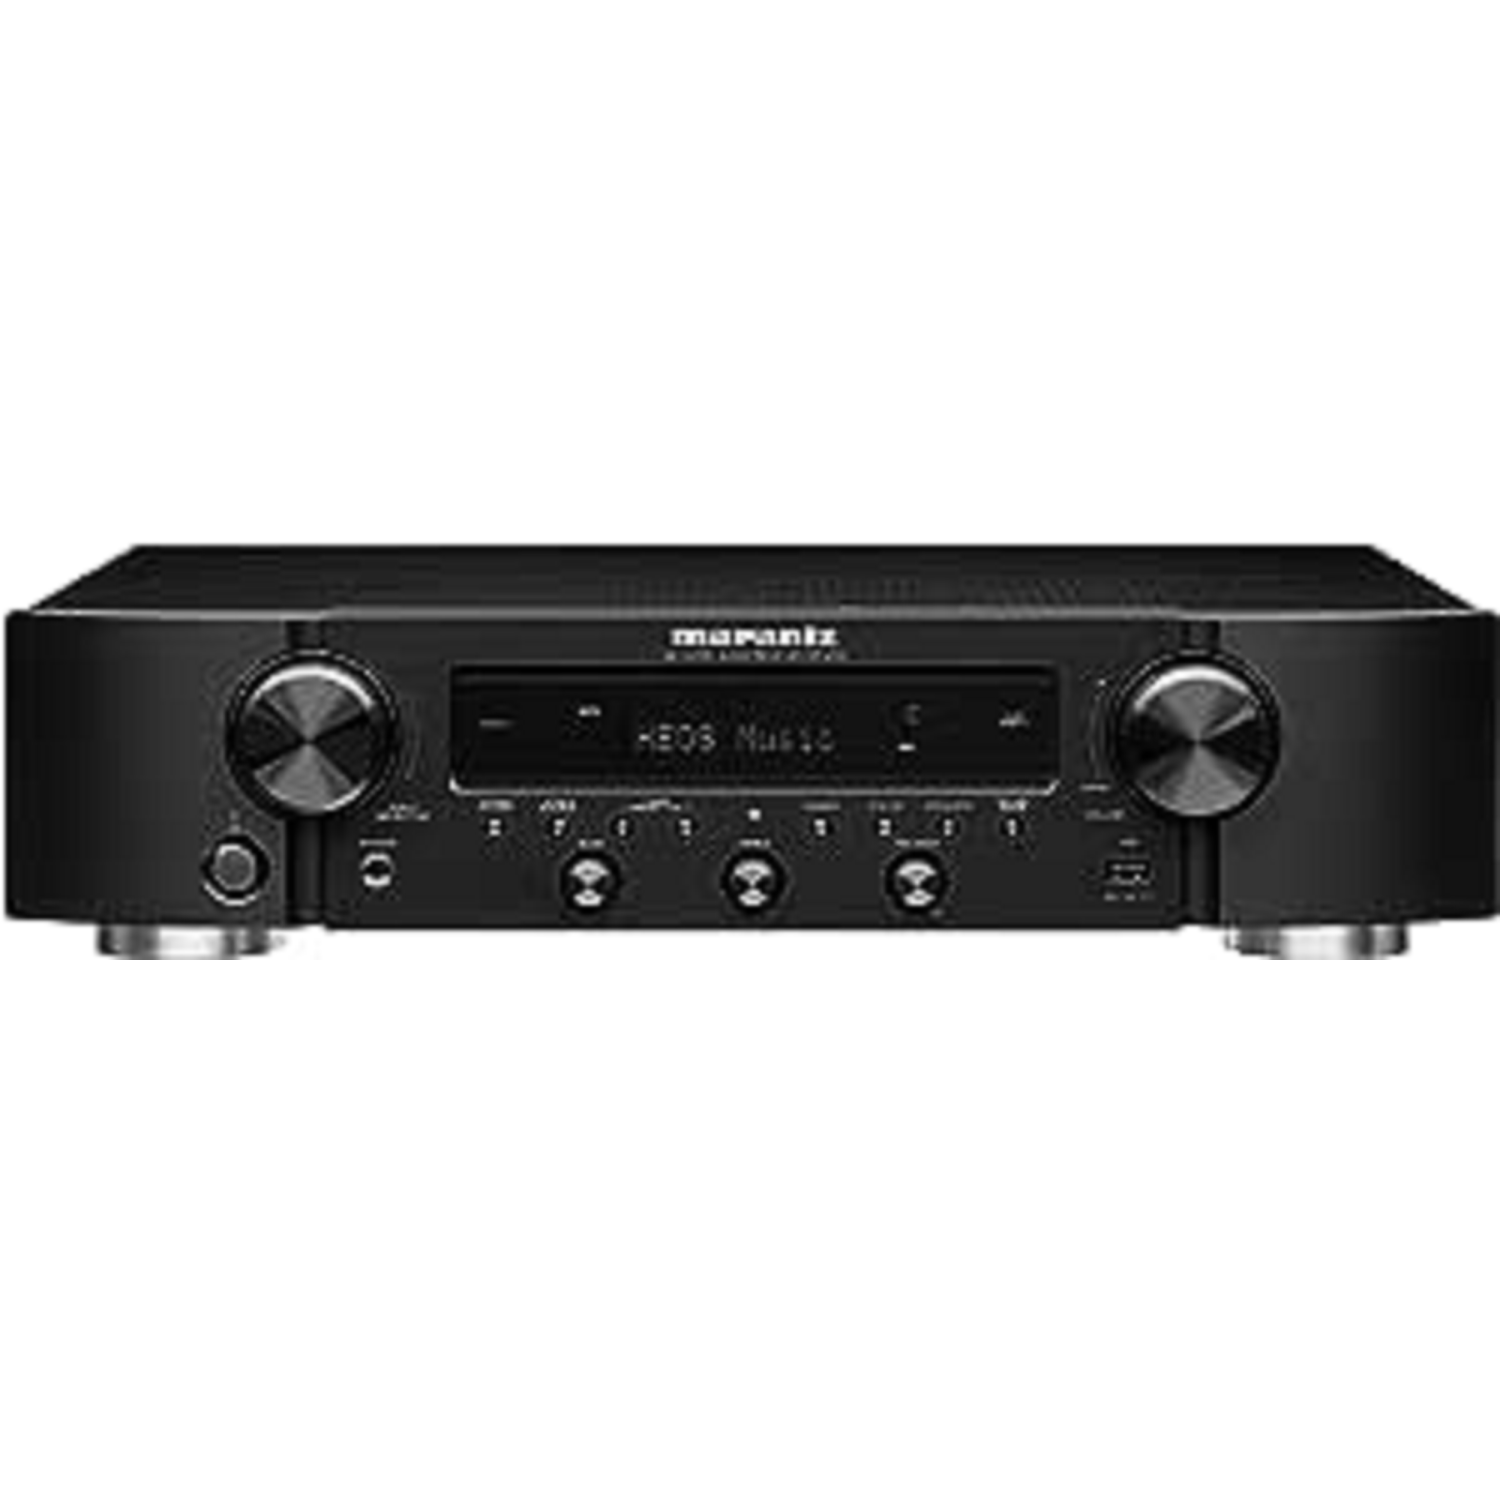 Marantz NR1200 AV Receiver (2019 Model), 2-Channel Home Theater Amp, Wi-Fi, Bluetooth, Heos + Alexa, Immersive Movies, Music & Gaming, Auto Low Latency Mode for Xbox One